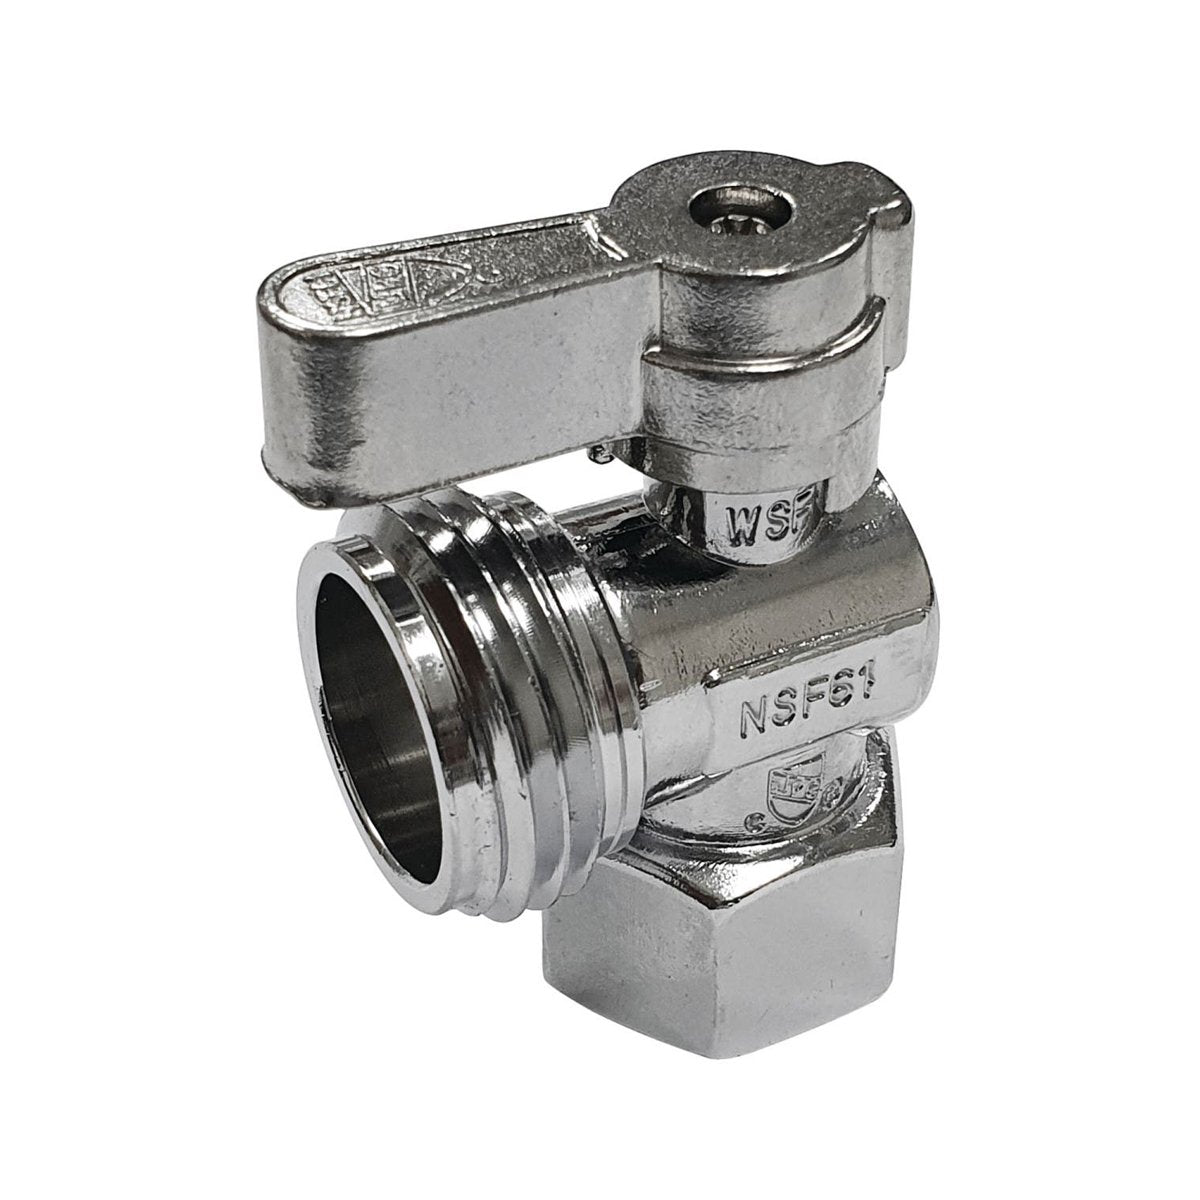 1/2" FIP x 3/4" Hose Thread Angle Shut Off Valve in Polished Chrome